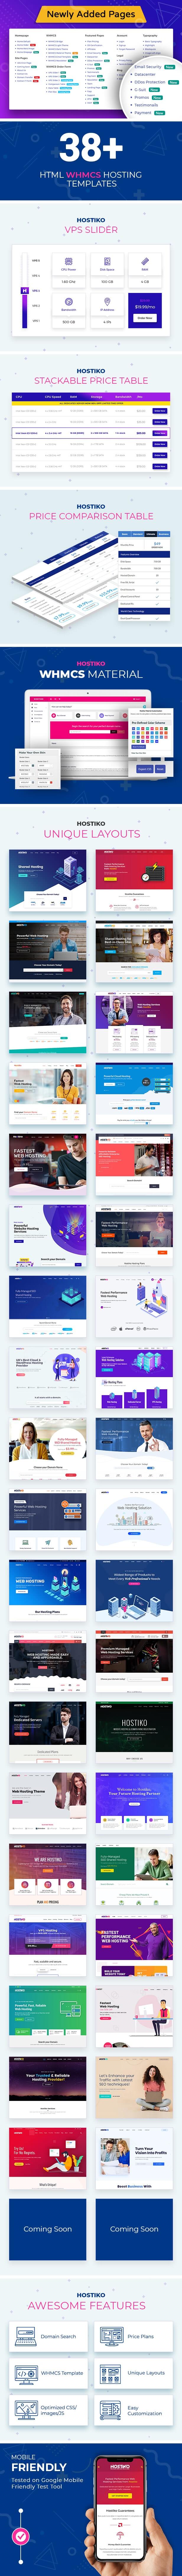 Hostiko - Hosting HTML & WHMCS Template With Isometric Design - 2